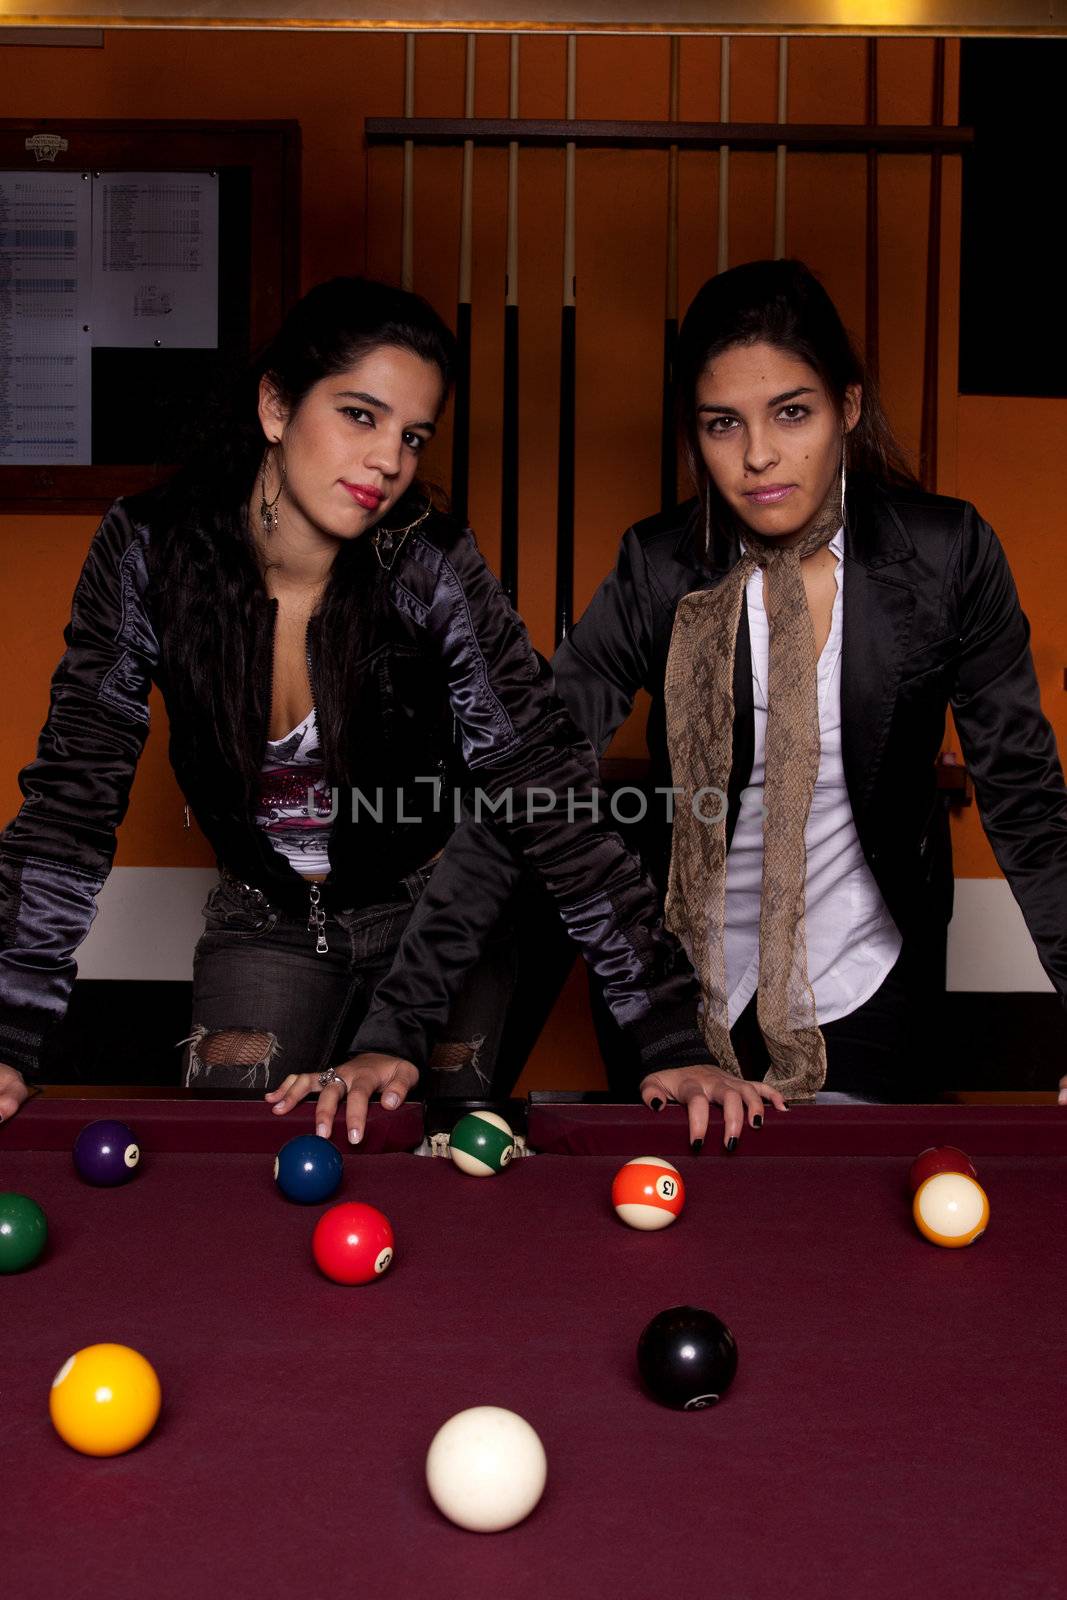 Detail view of two young girls next to a snooker table.